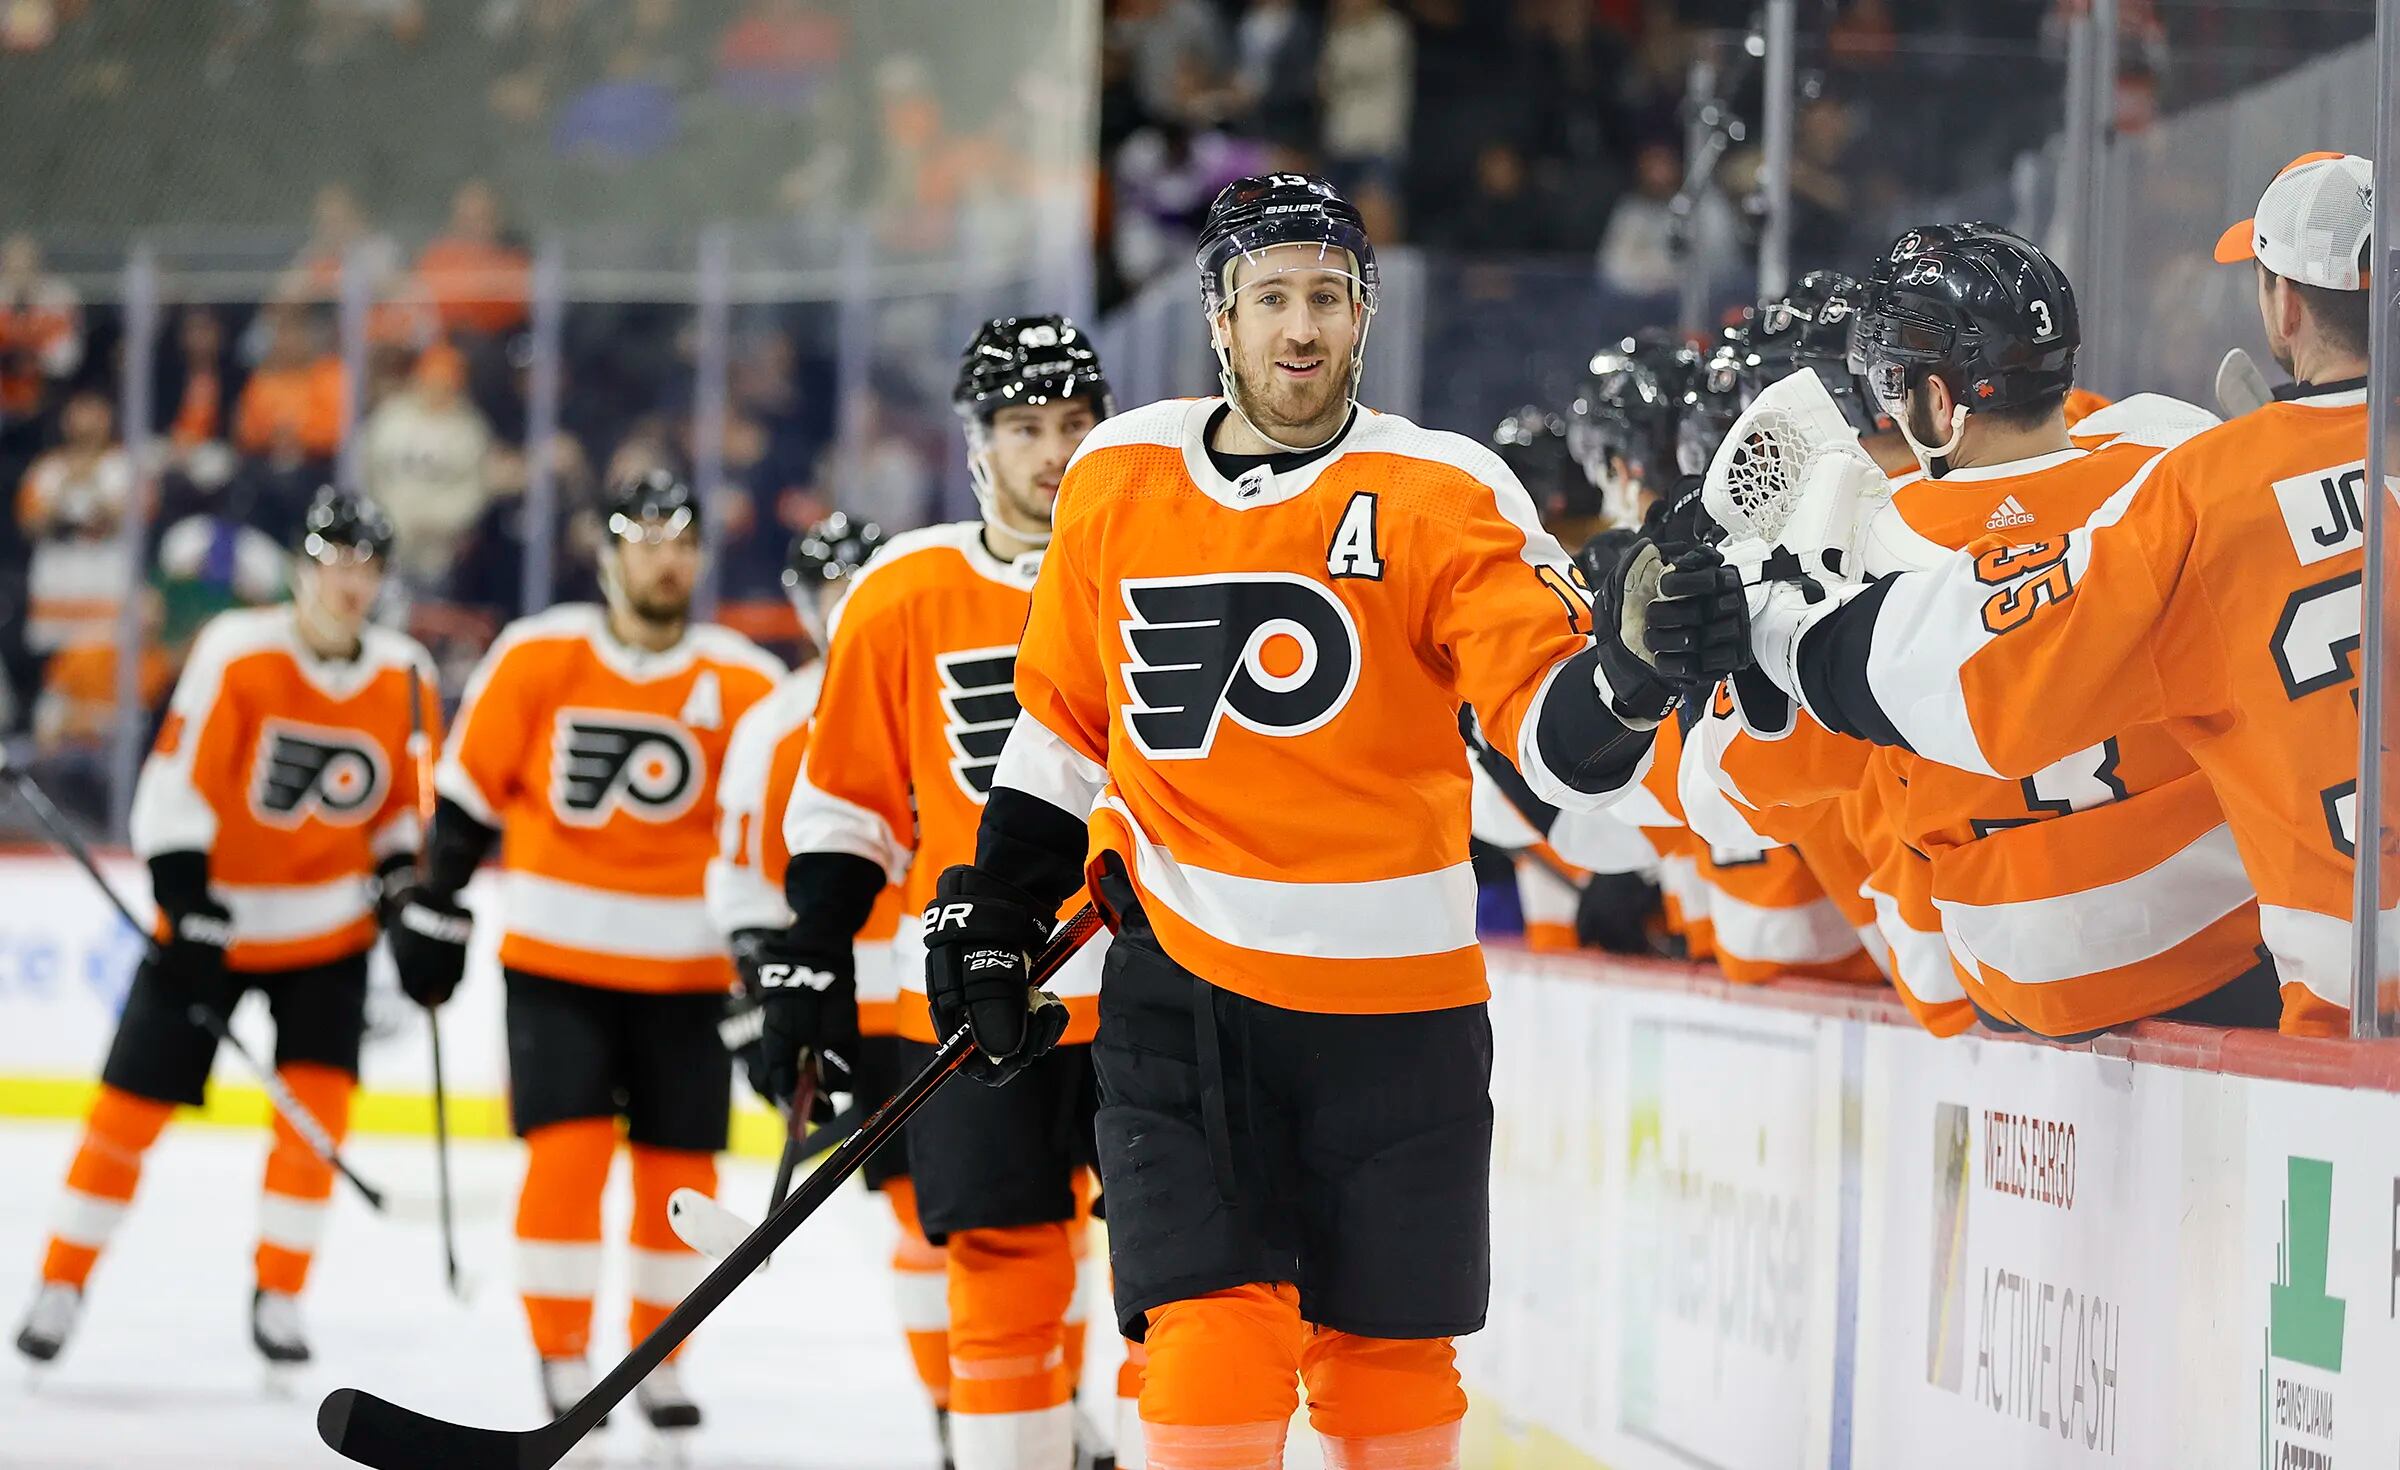 Alternate Captain Ivan Provorov will step up as a leader for the Flyers